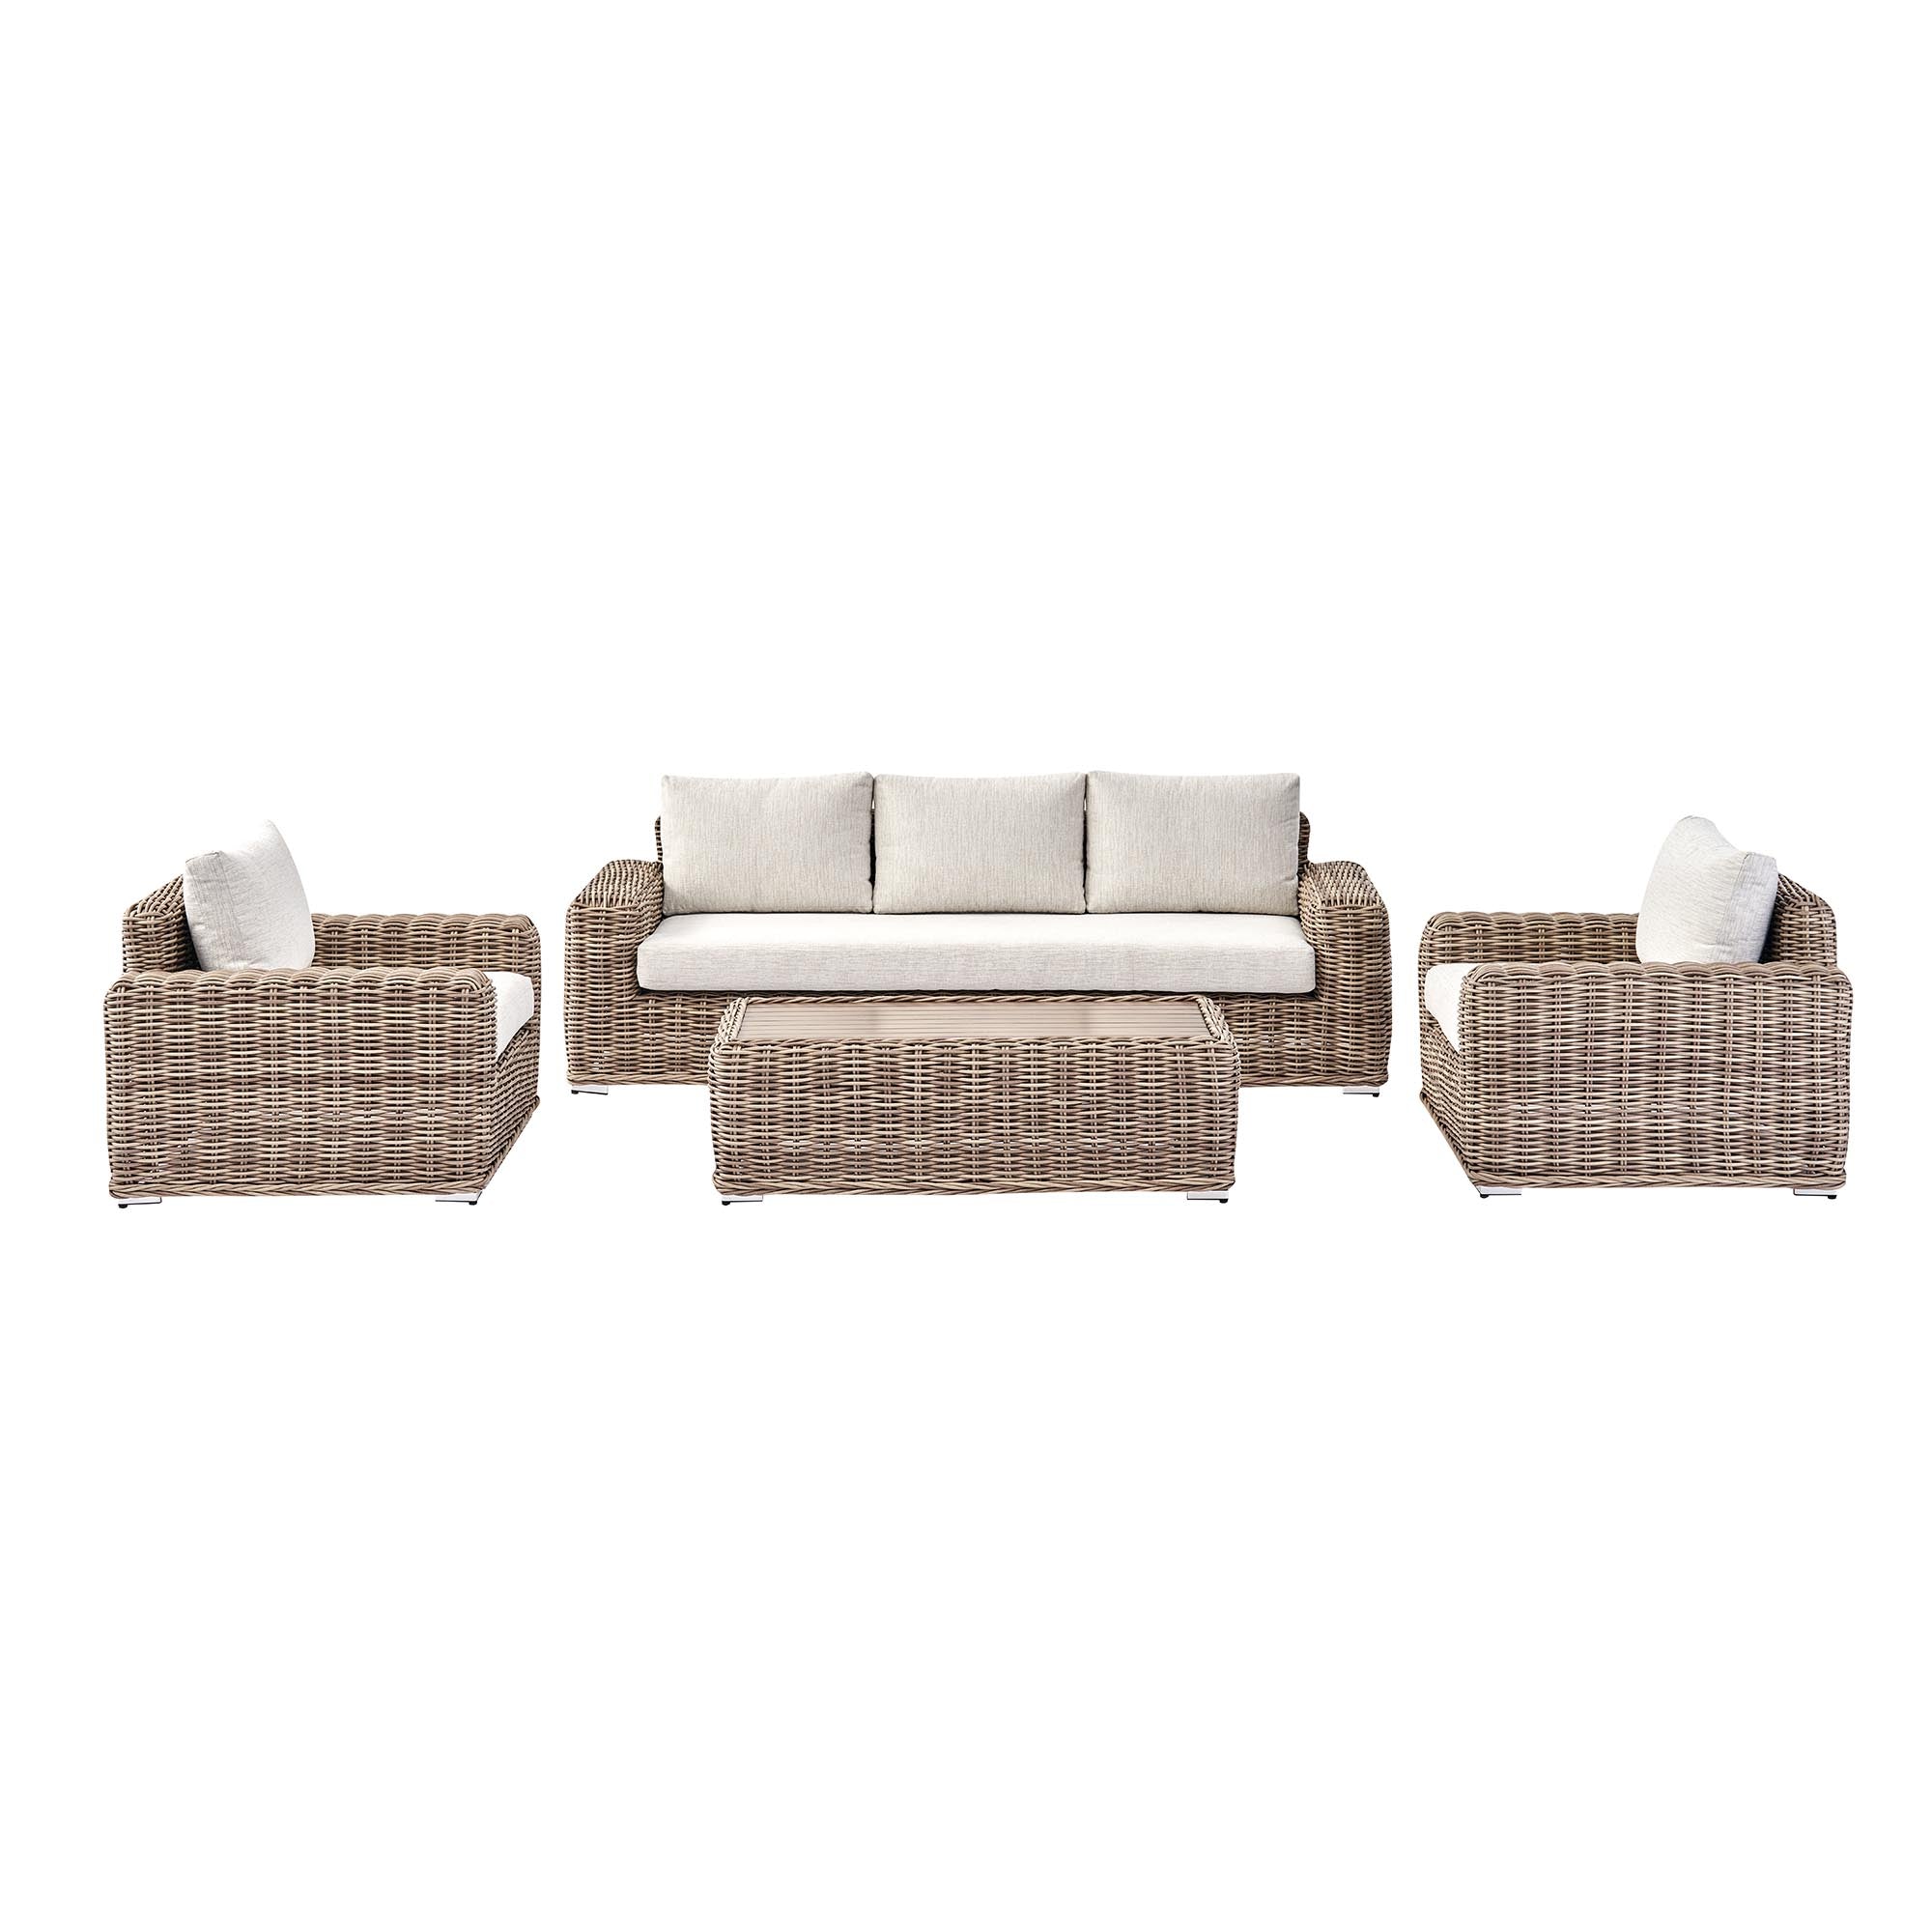 Bellagio Round Wicker Sofa Set with Coffee Table, Natural